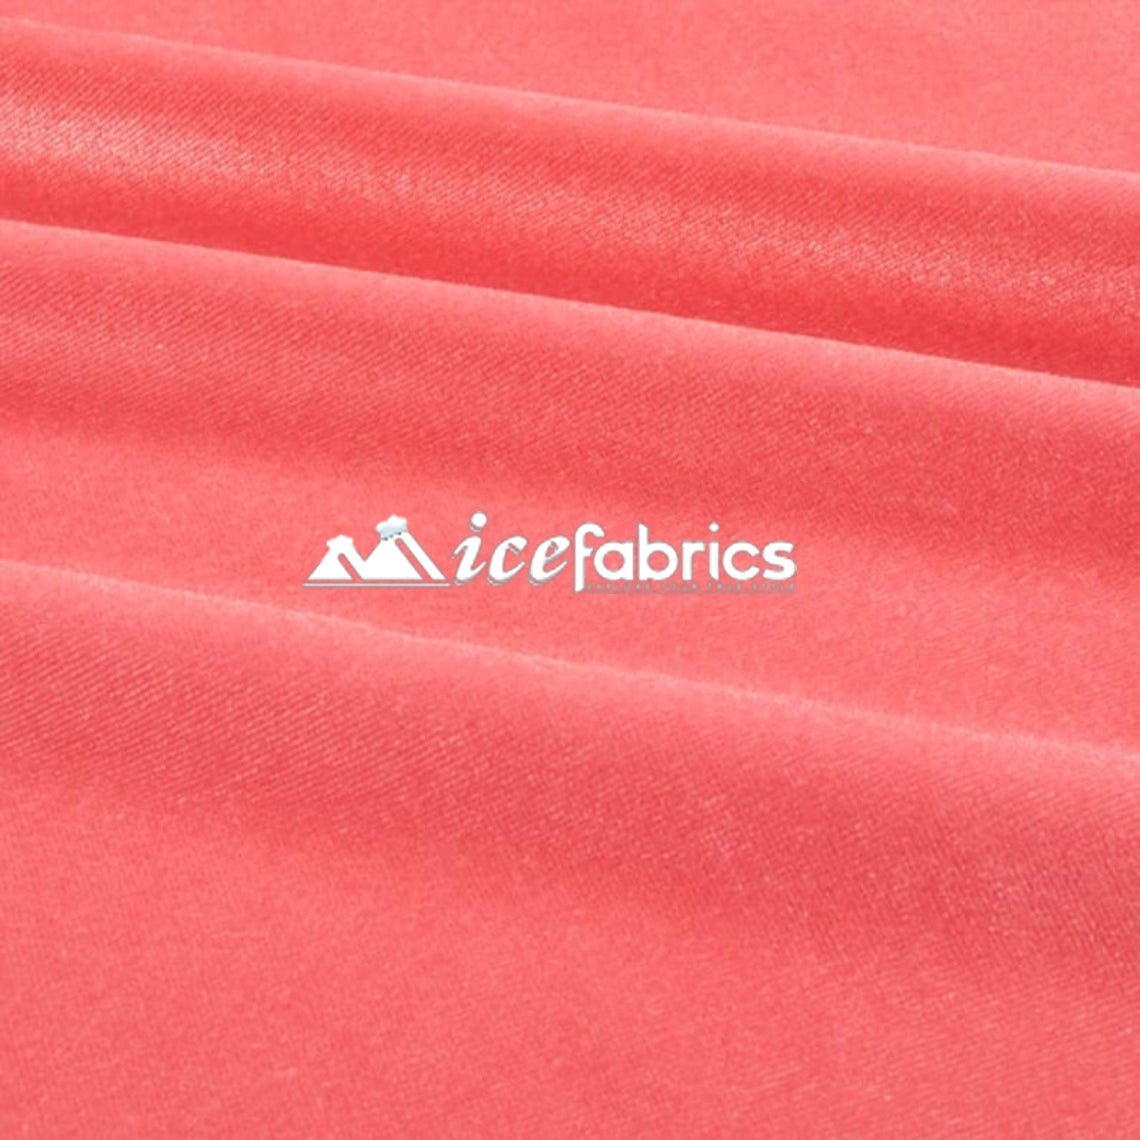 Coral Velvet Fabric By The Yard | 4 Way StretchVelvet FabricICE FABRICSICE FABRICSBy The Yard (58" Wide)Coral Velvet Fabric By The Yard | 4 Way Stretch ICE FABRICS